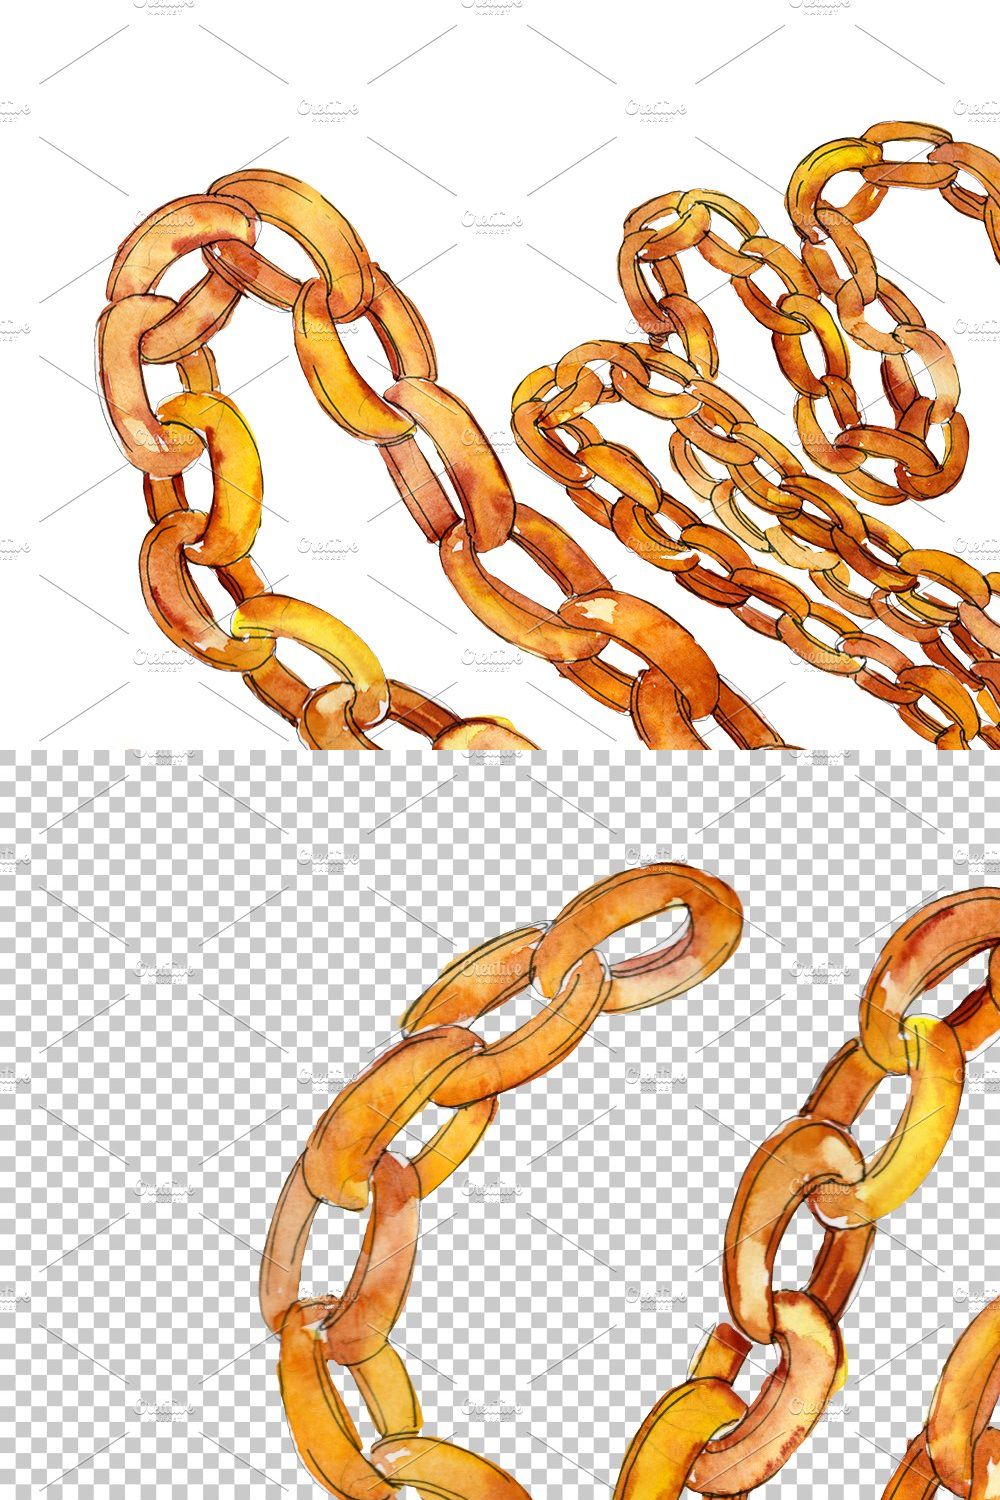 Chains, leather belts Watercolor png pinterest preview image.